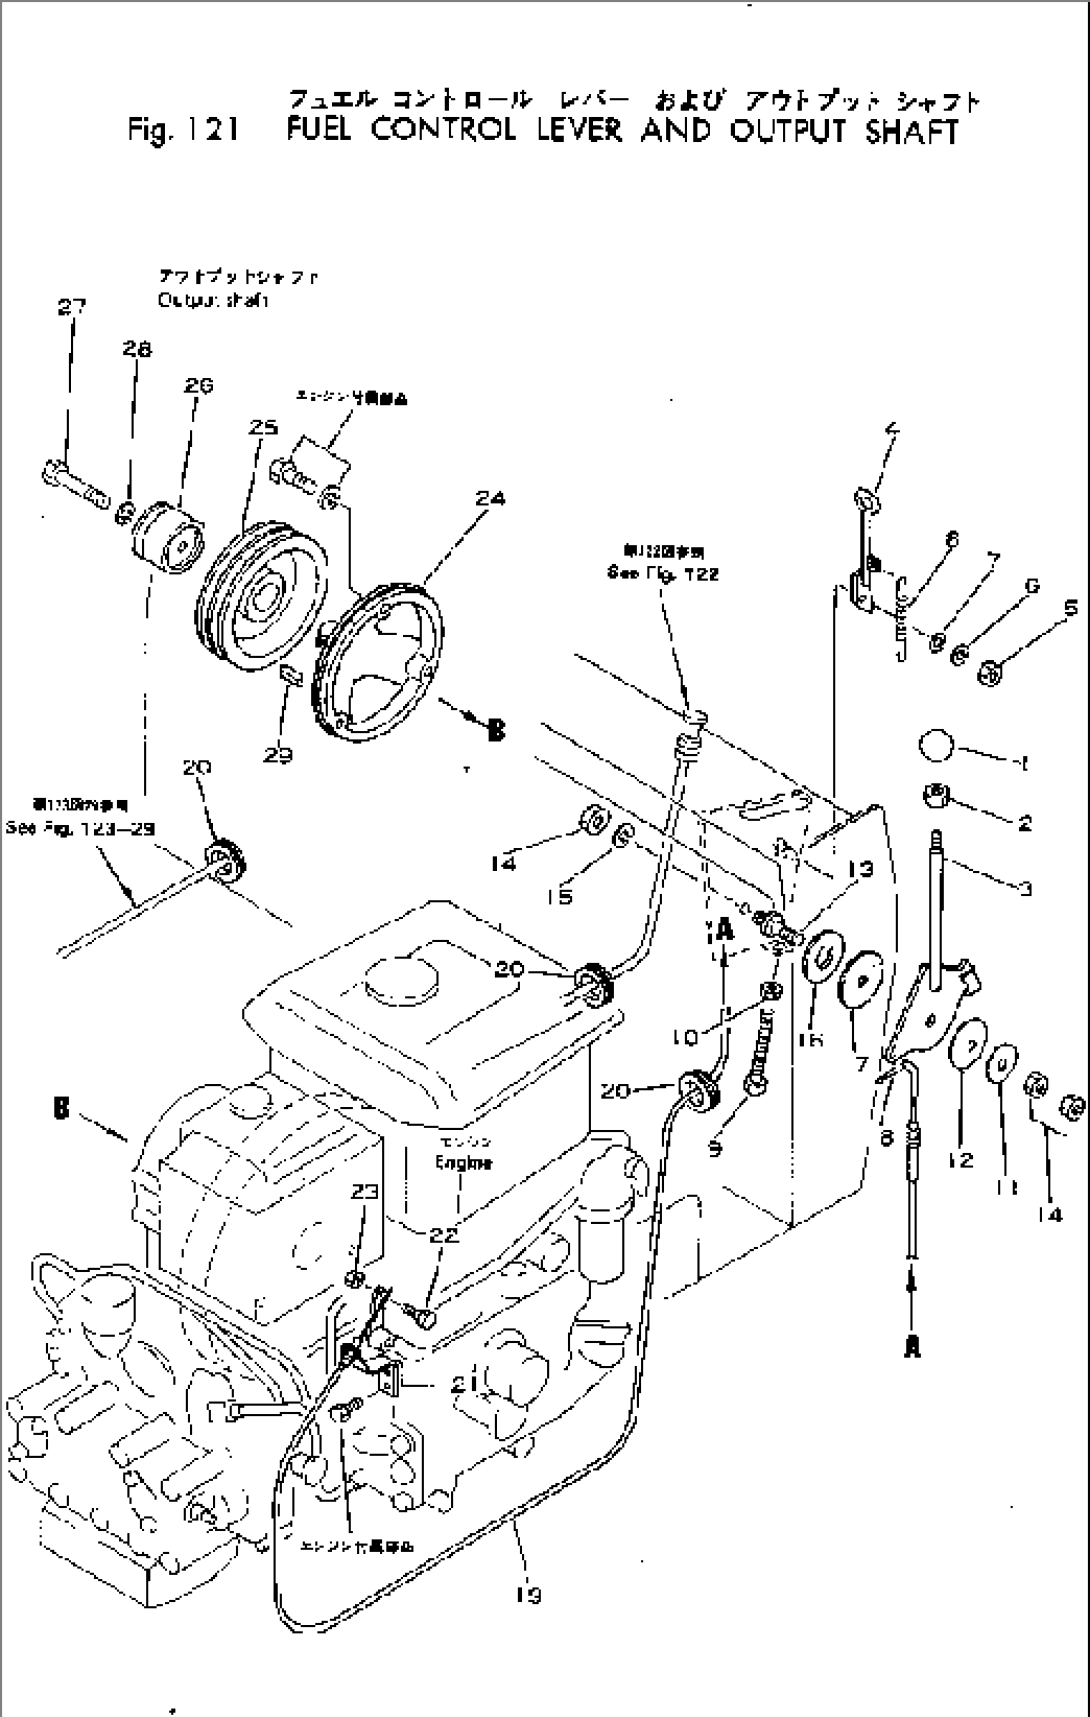 FUEL CONTROL LEVER AND OUTPUT SHAFT